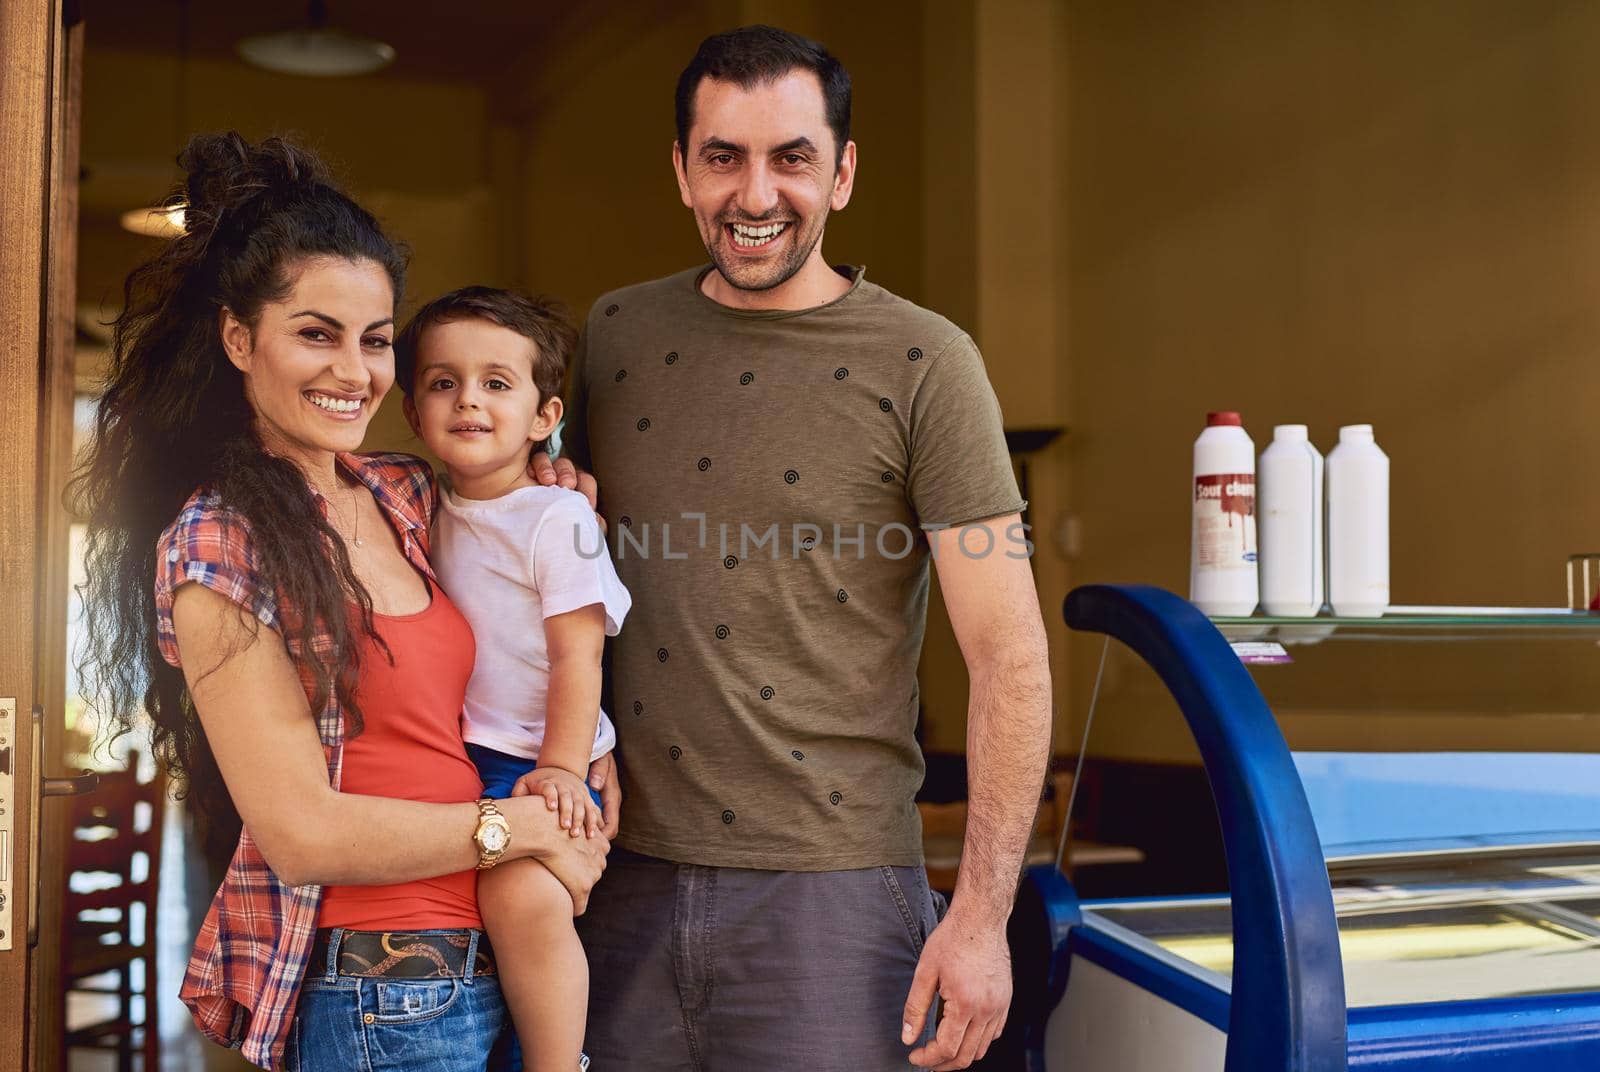 This ice cream shop will be his one day. Cropped portrait of an affectionate family of three standing in the entrance way to their ice cream shop. by YuriArcurs